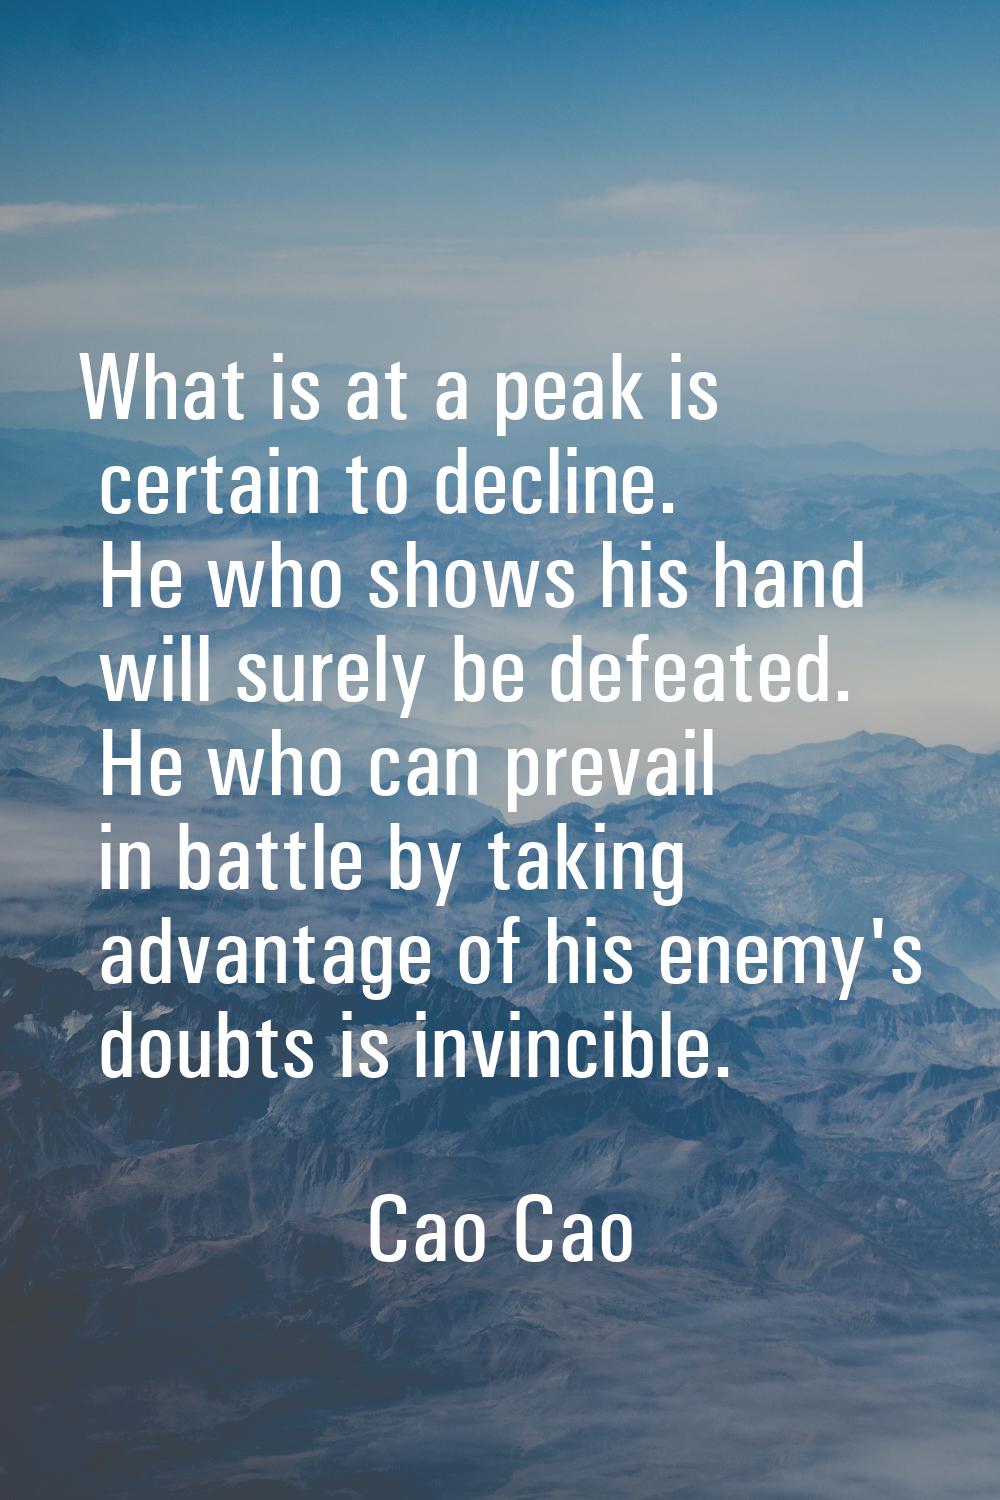 What is at a peak is certain to decline. He who shows his hand will surely be defeated. He who can 